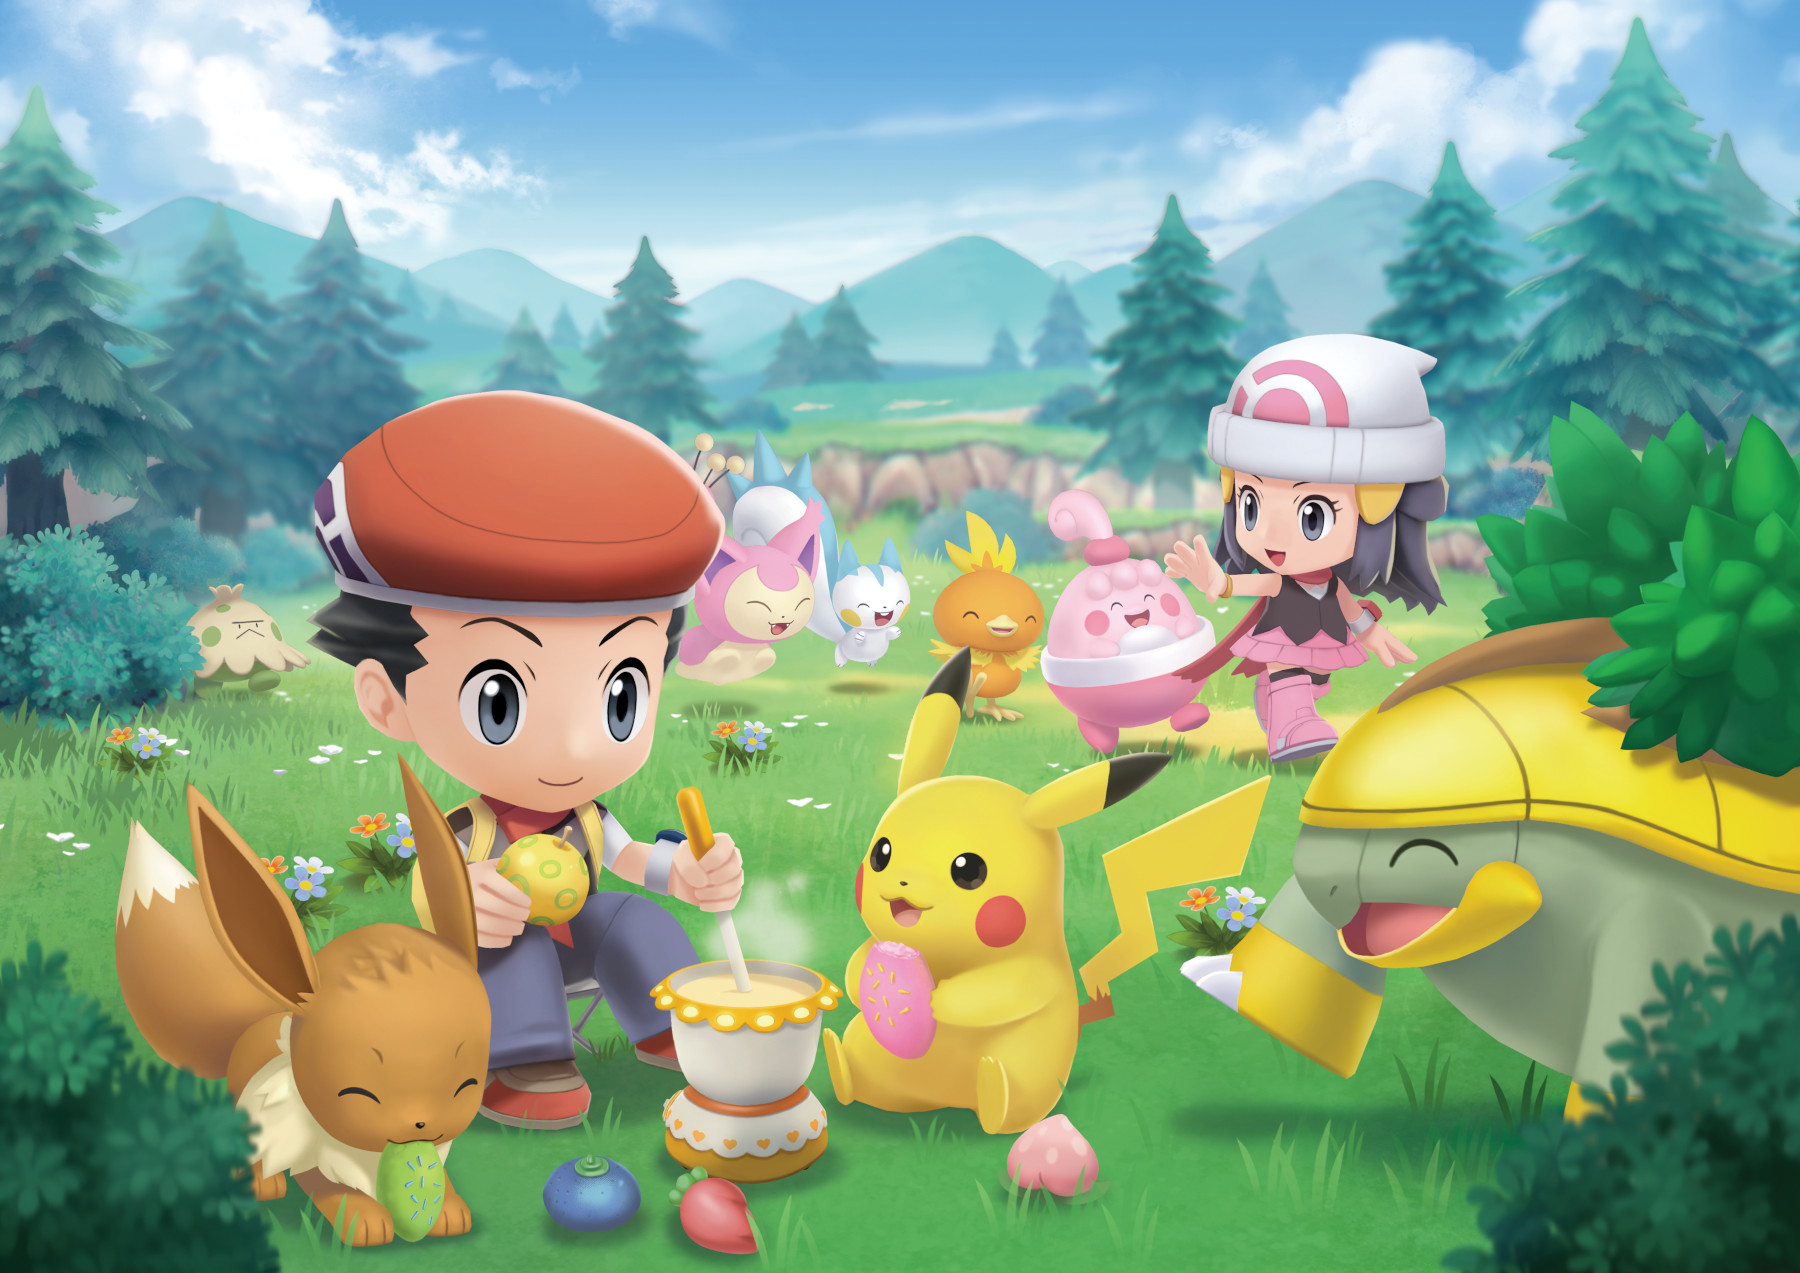 Key art for 'Pokémon Brilliant Diamond' and 'Pokémon Shining Pearl. It sees the game's male and female avatars eating with Pikachu, Eevee, and more Pokémon.